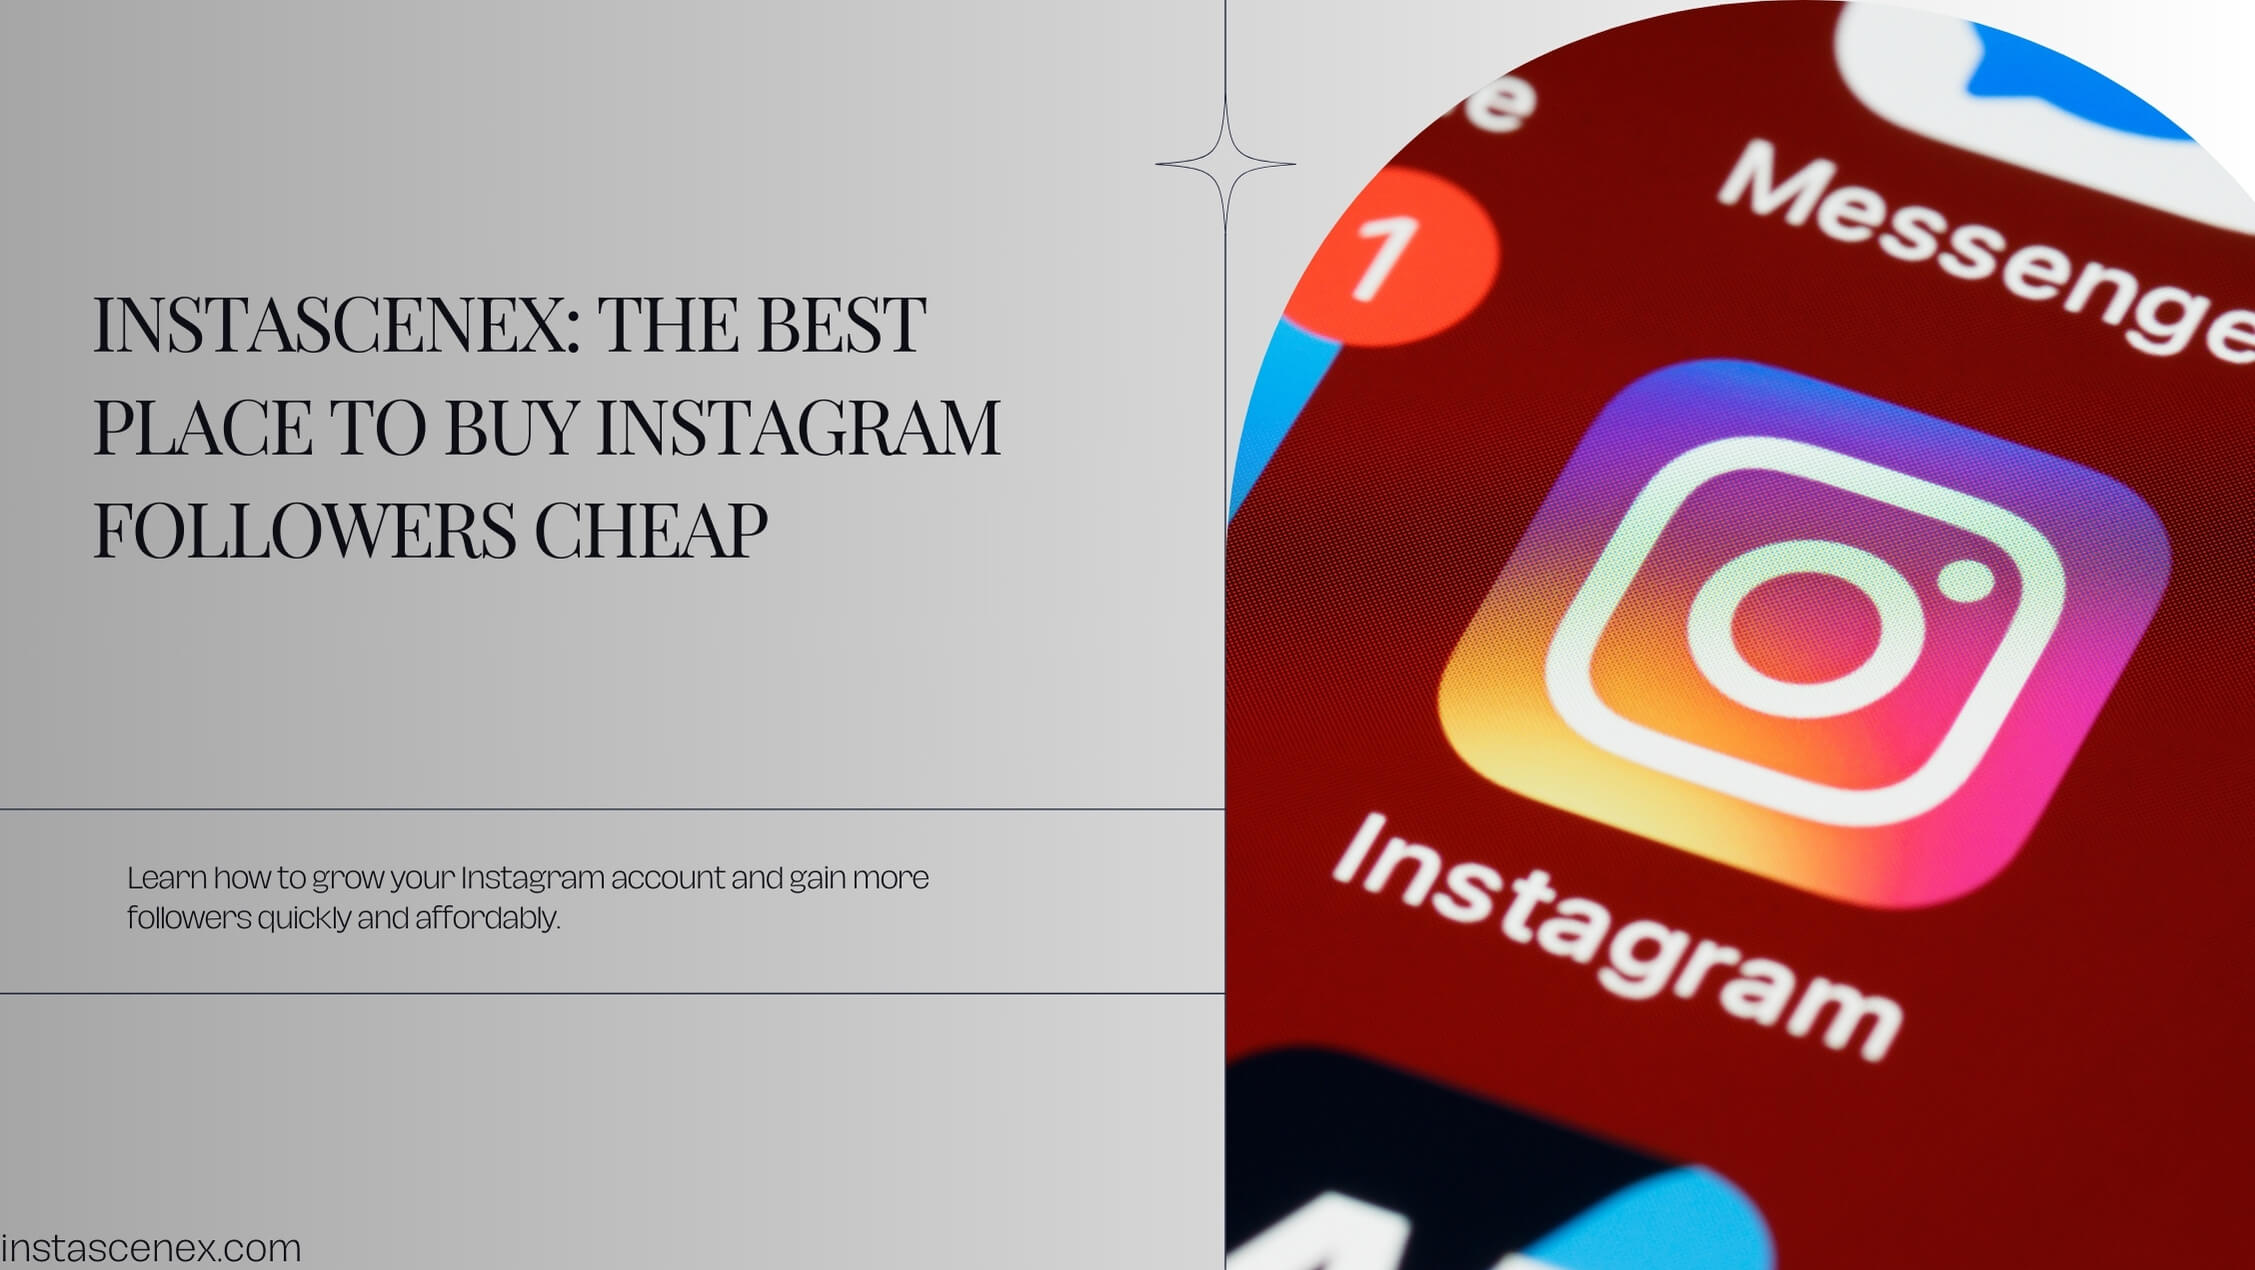 Buy Instagram Followers Cheap: The Best Place to Do it